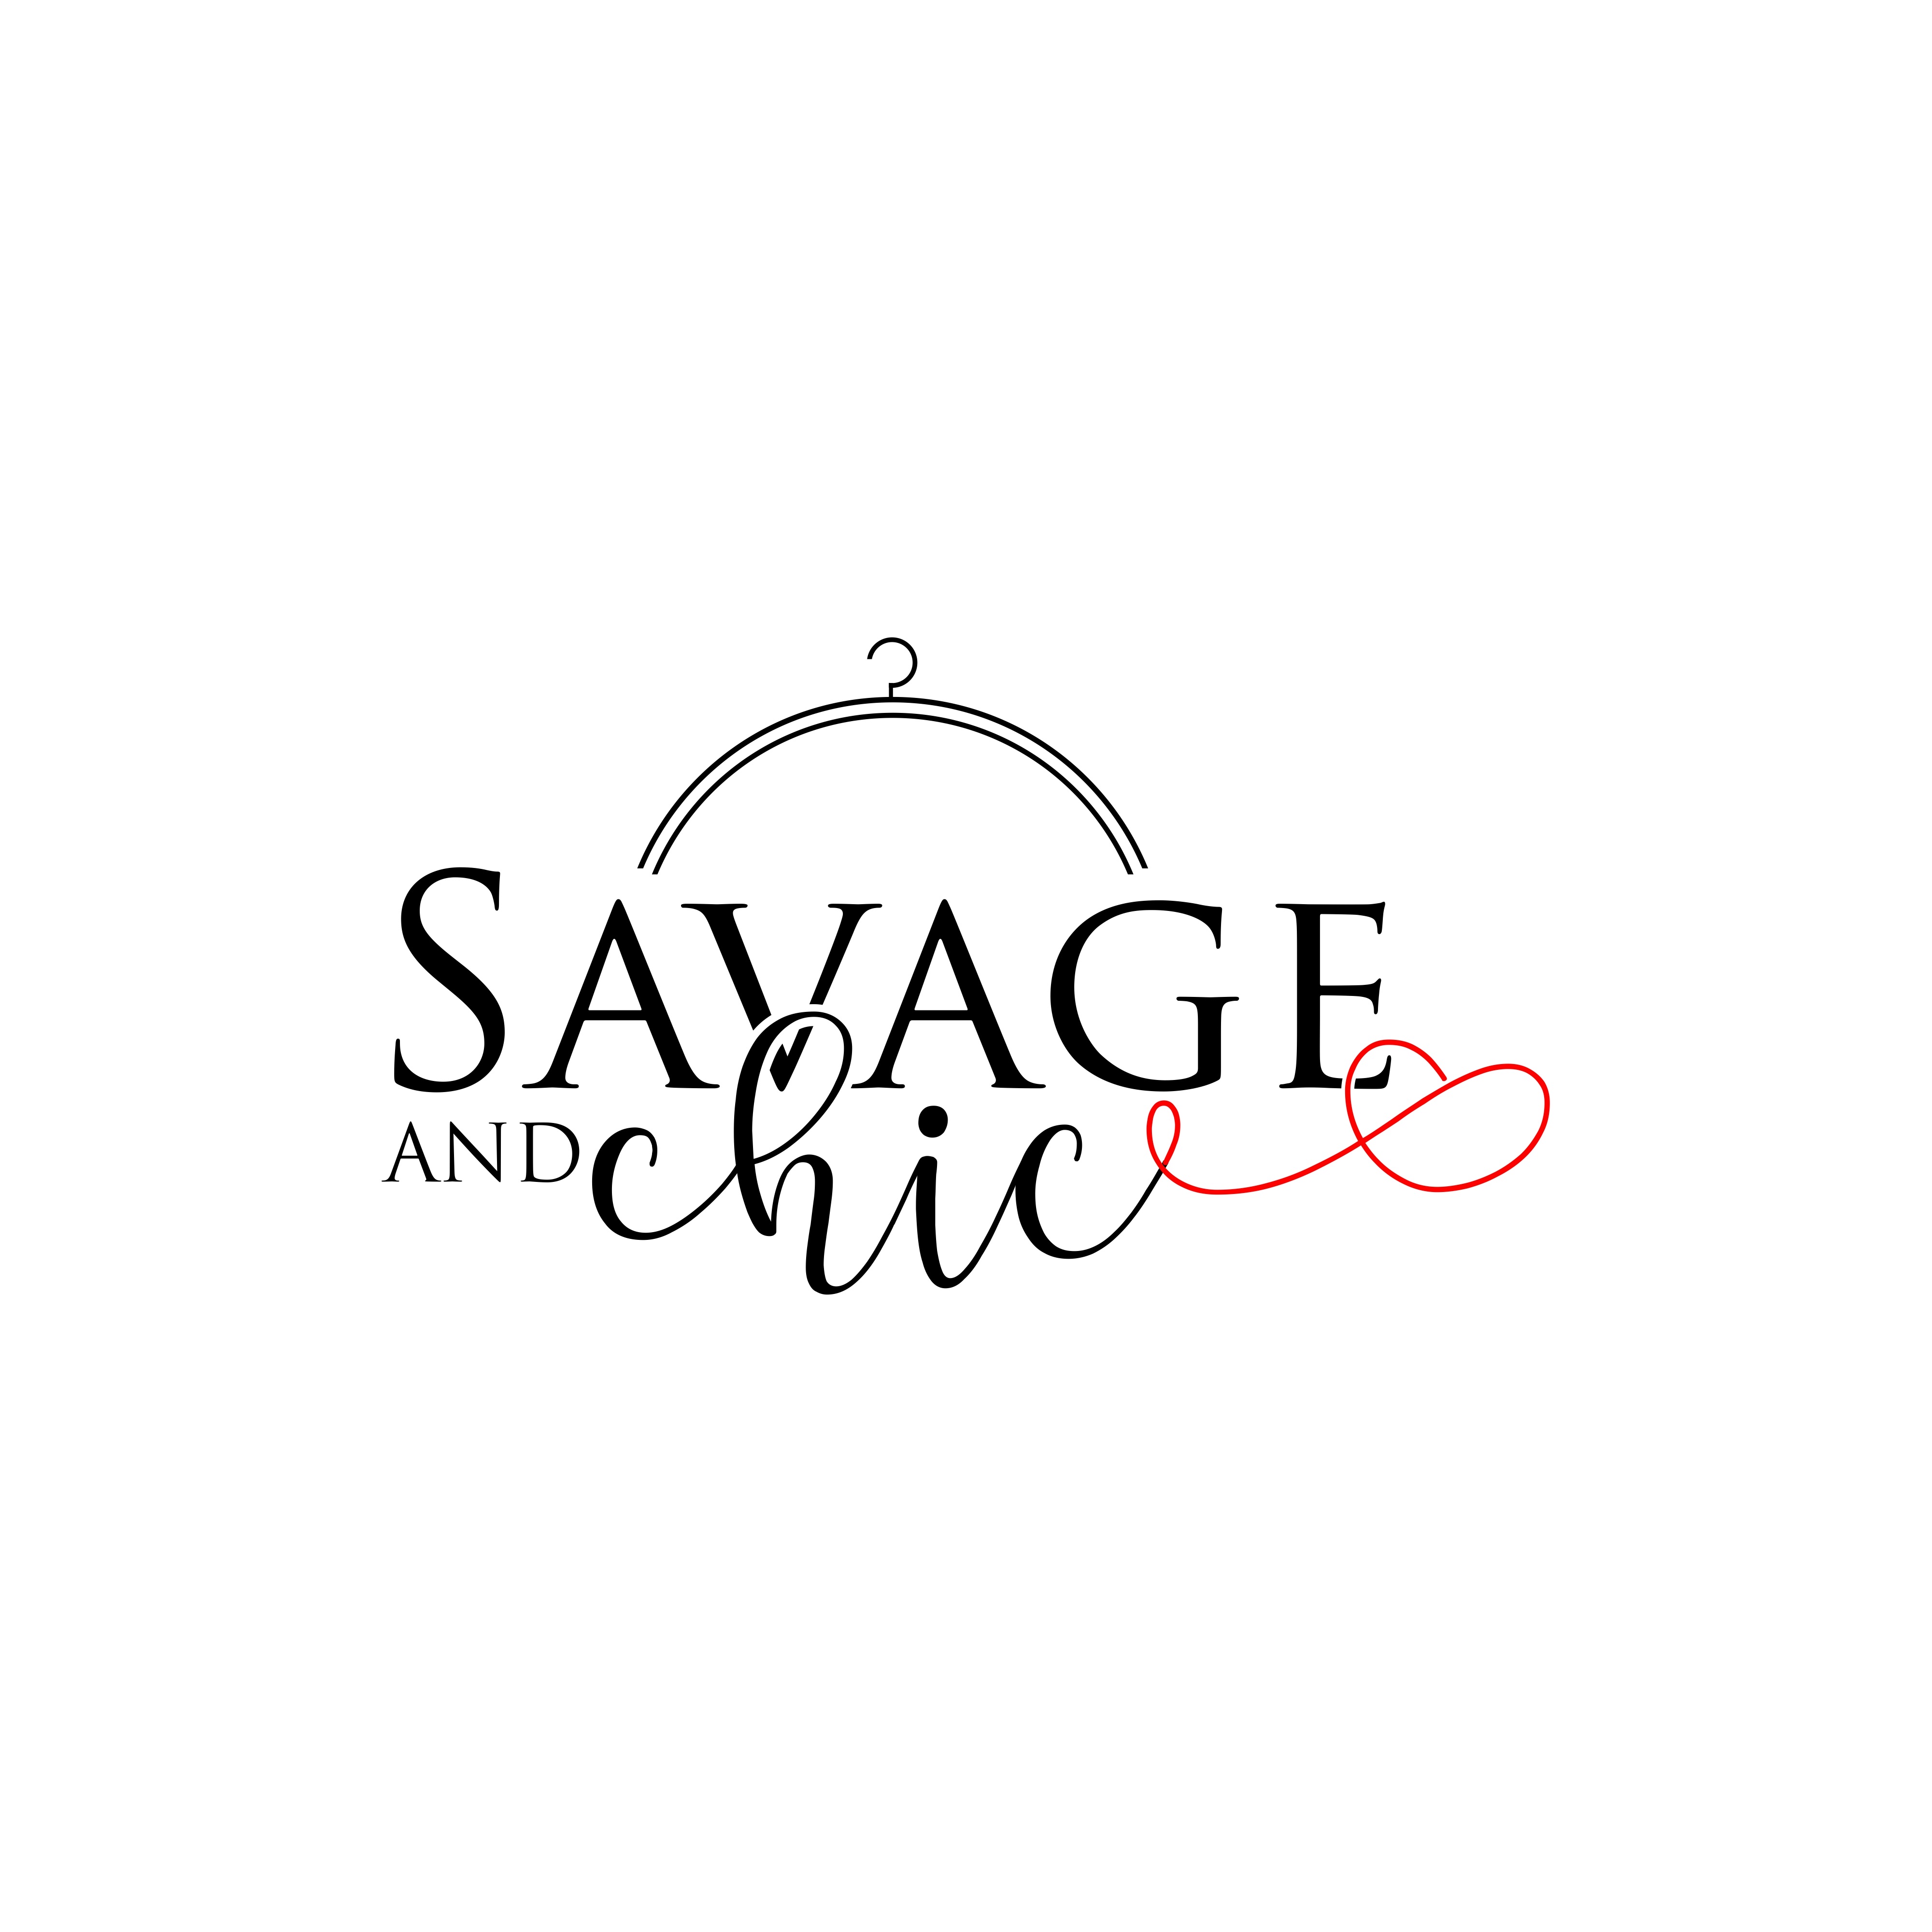 Savageandchic.com is offering some of the coolest collection of outfits for curvy women